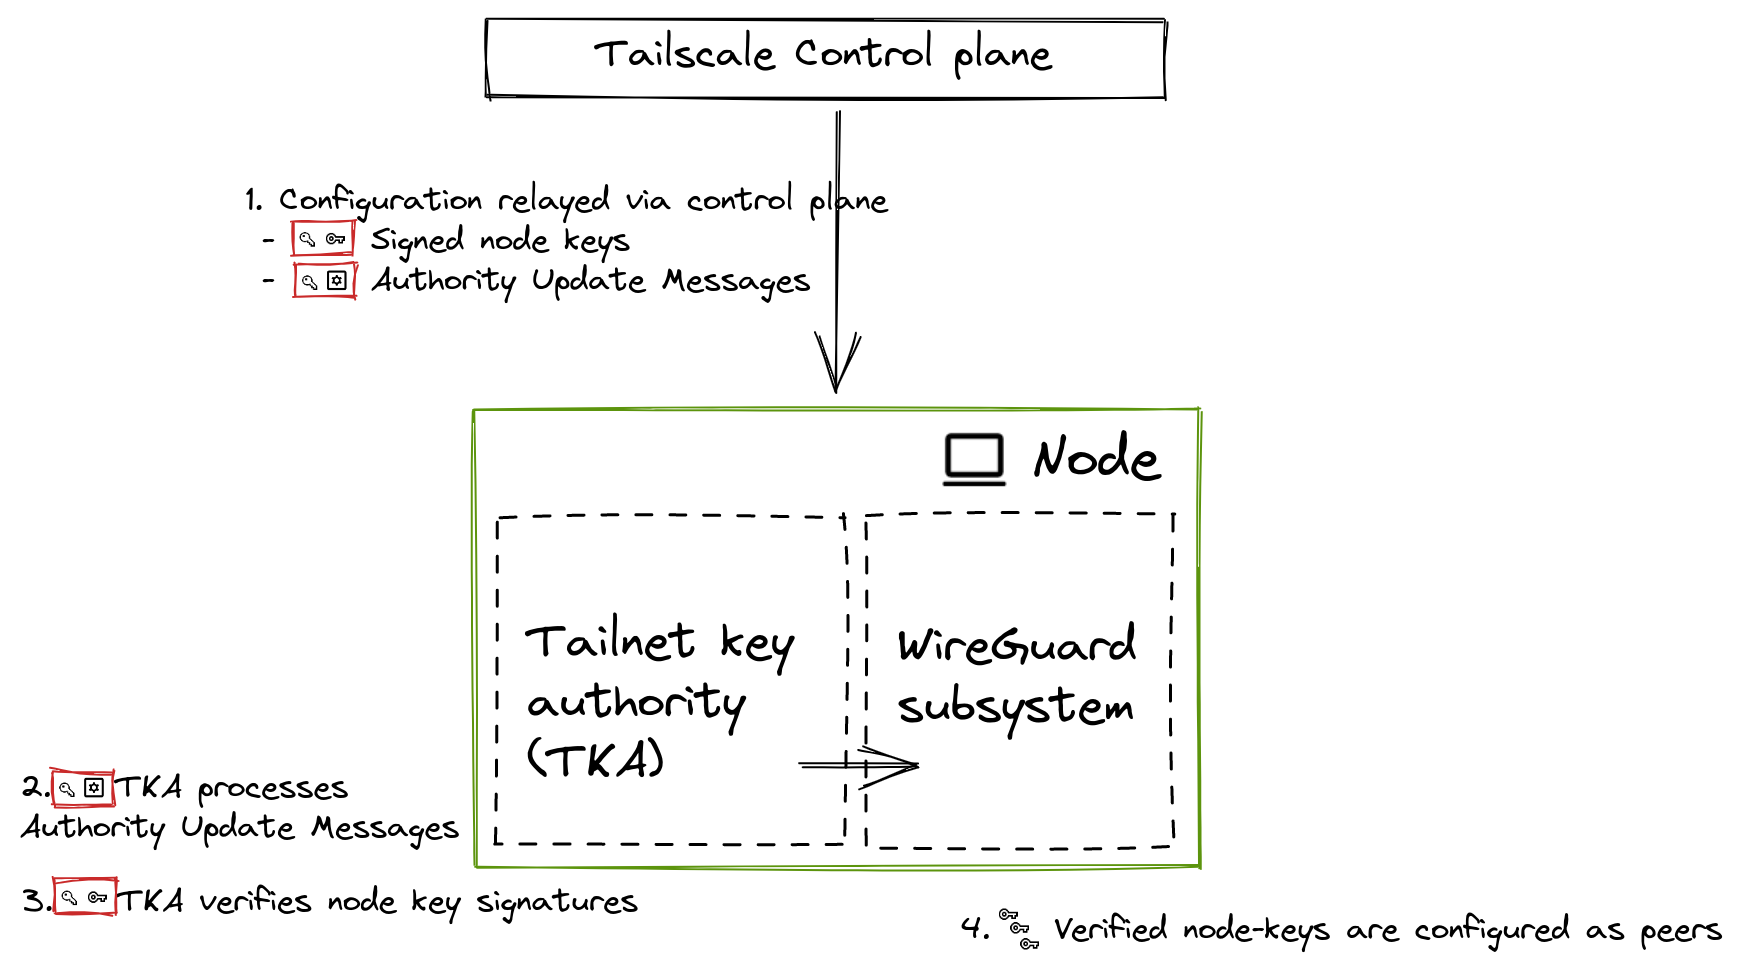 The control plane relays authority update messages to nodes, which verifies and processes updates to its local tailnet key authority.